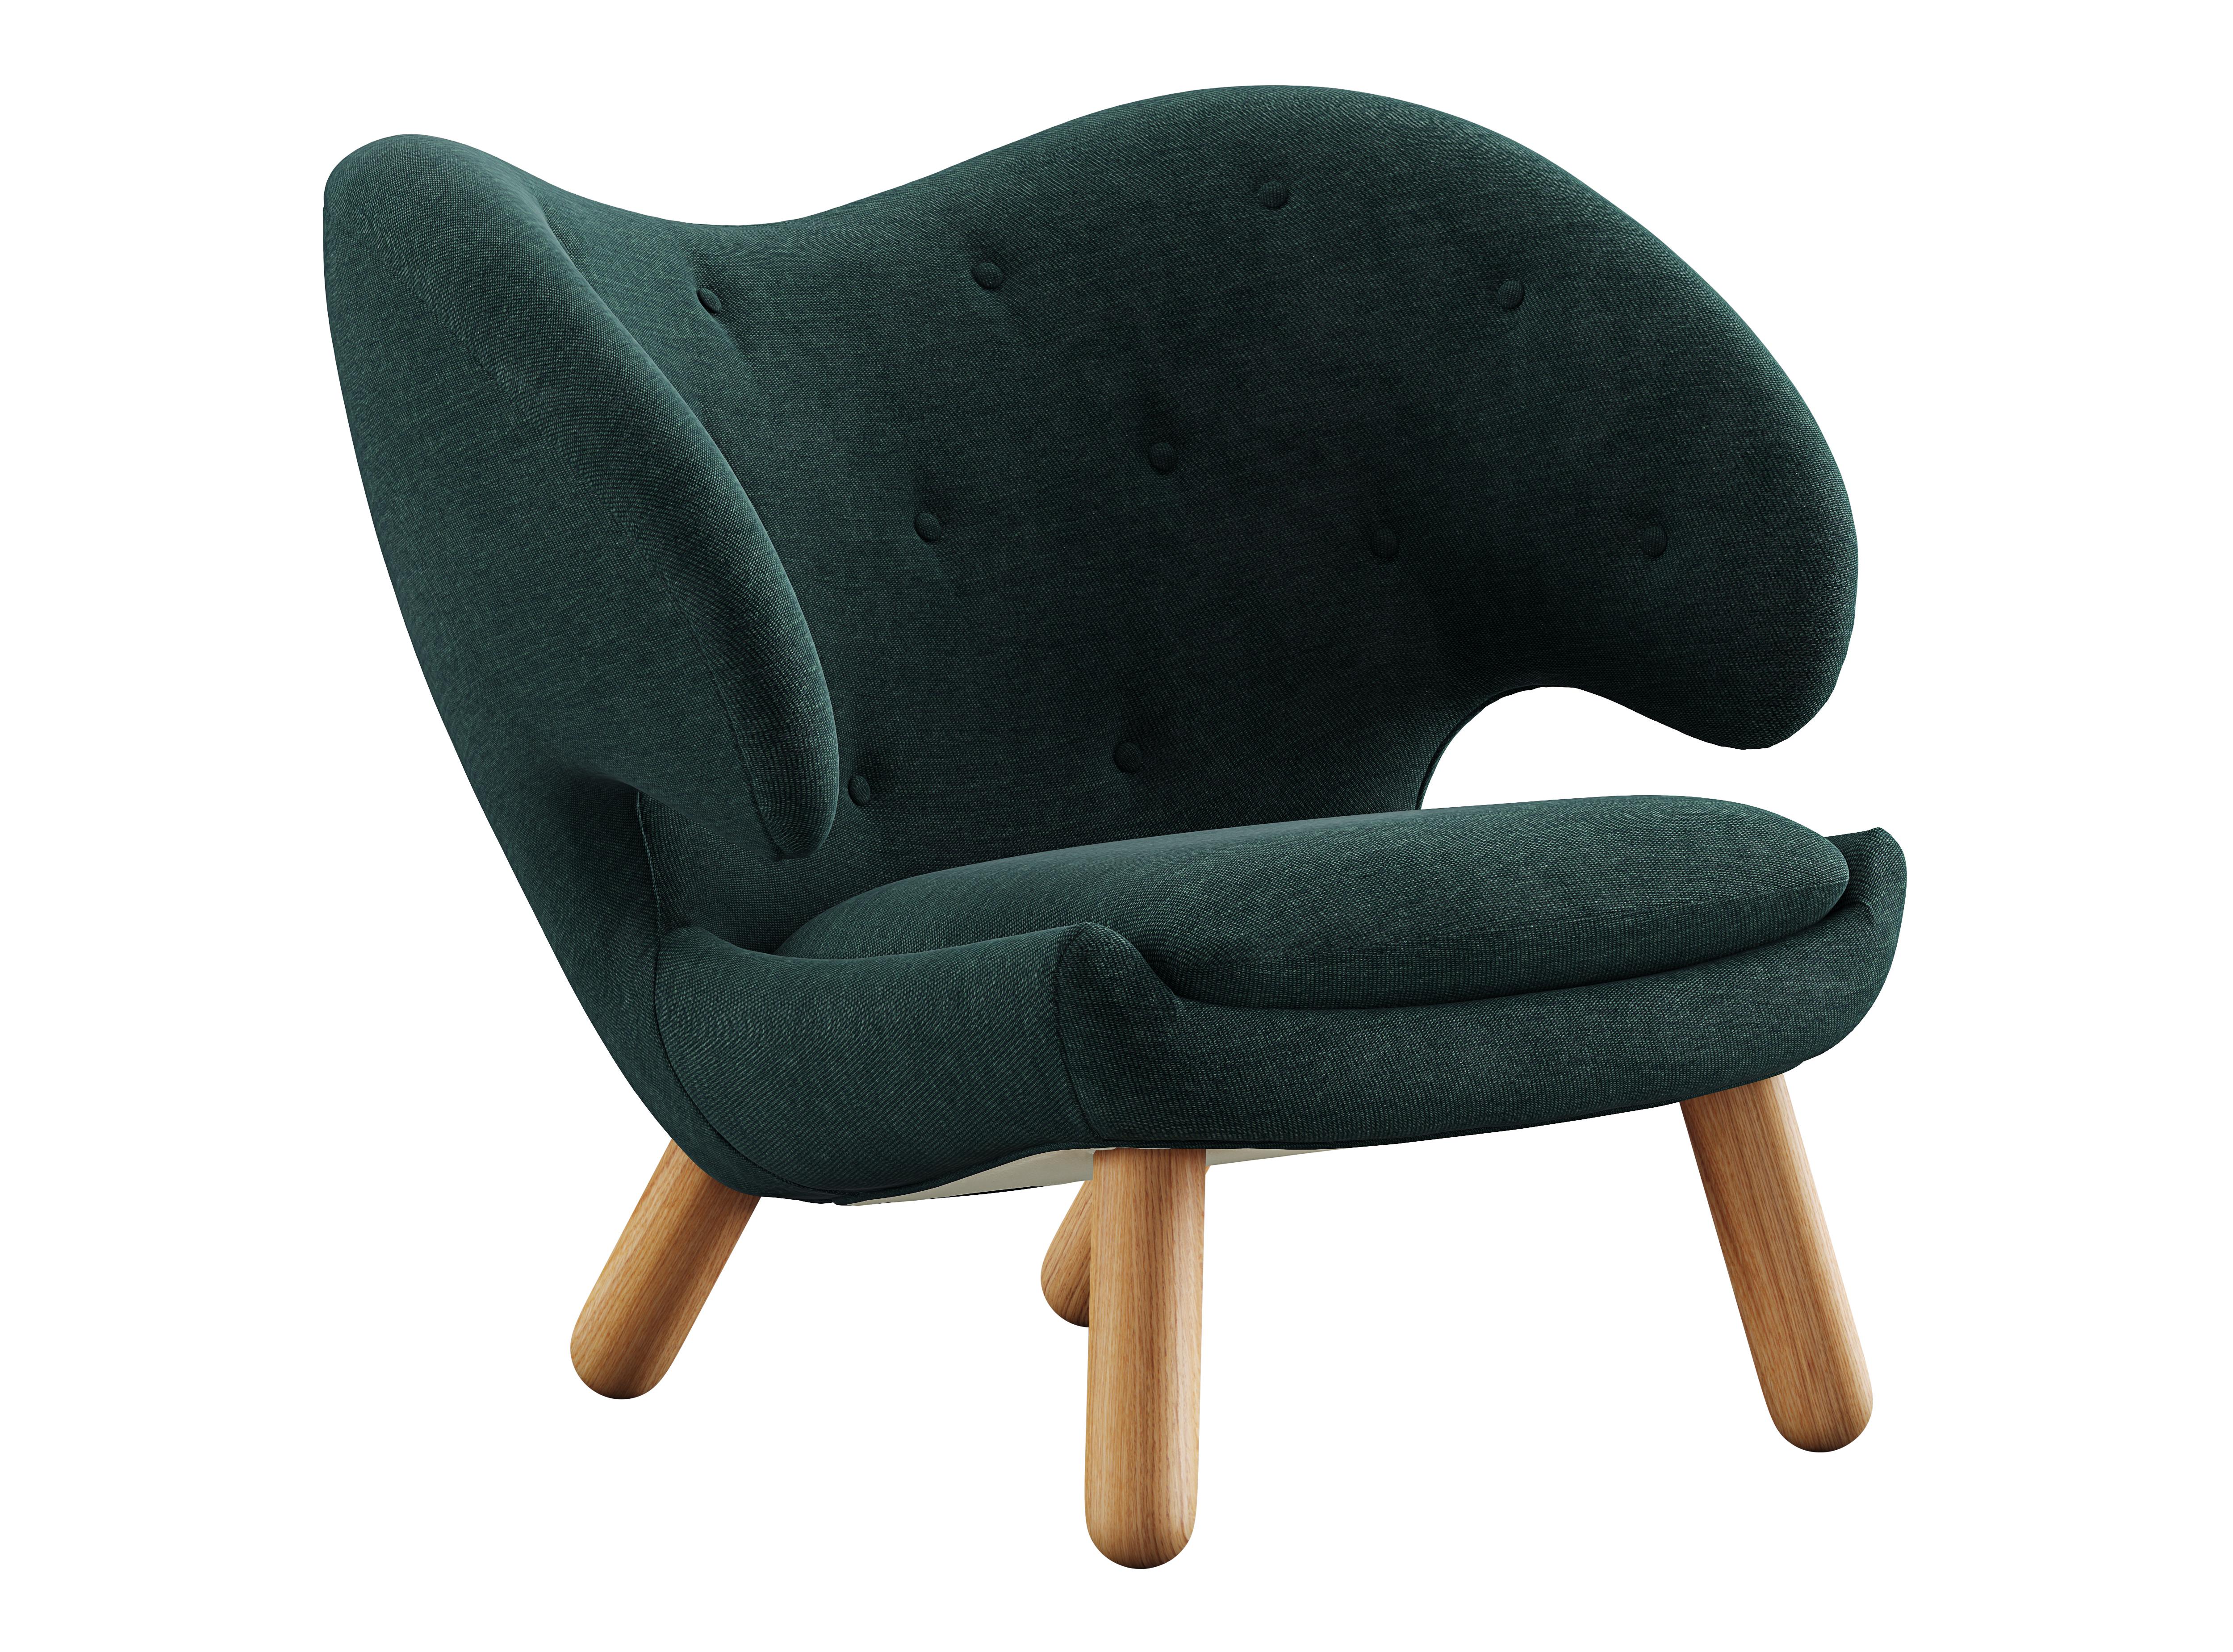 Pelican chair designed by Finn Juhl in 1940.
Manufactured by House of Finn Juhl in Denmark.
Pelican chair was probably the one furthest ahead of its time. When it was presented at the Copenhagen Cabinetmakers’ Guild Exhibition in 1940, it stood out